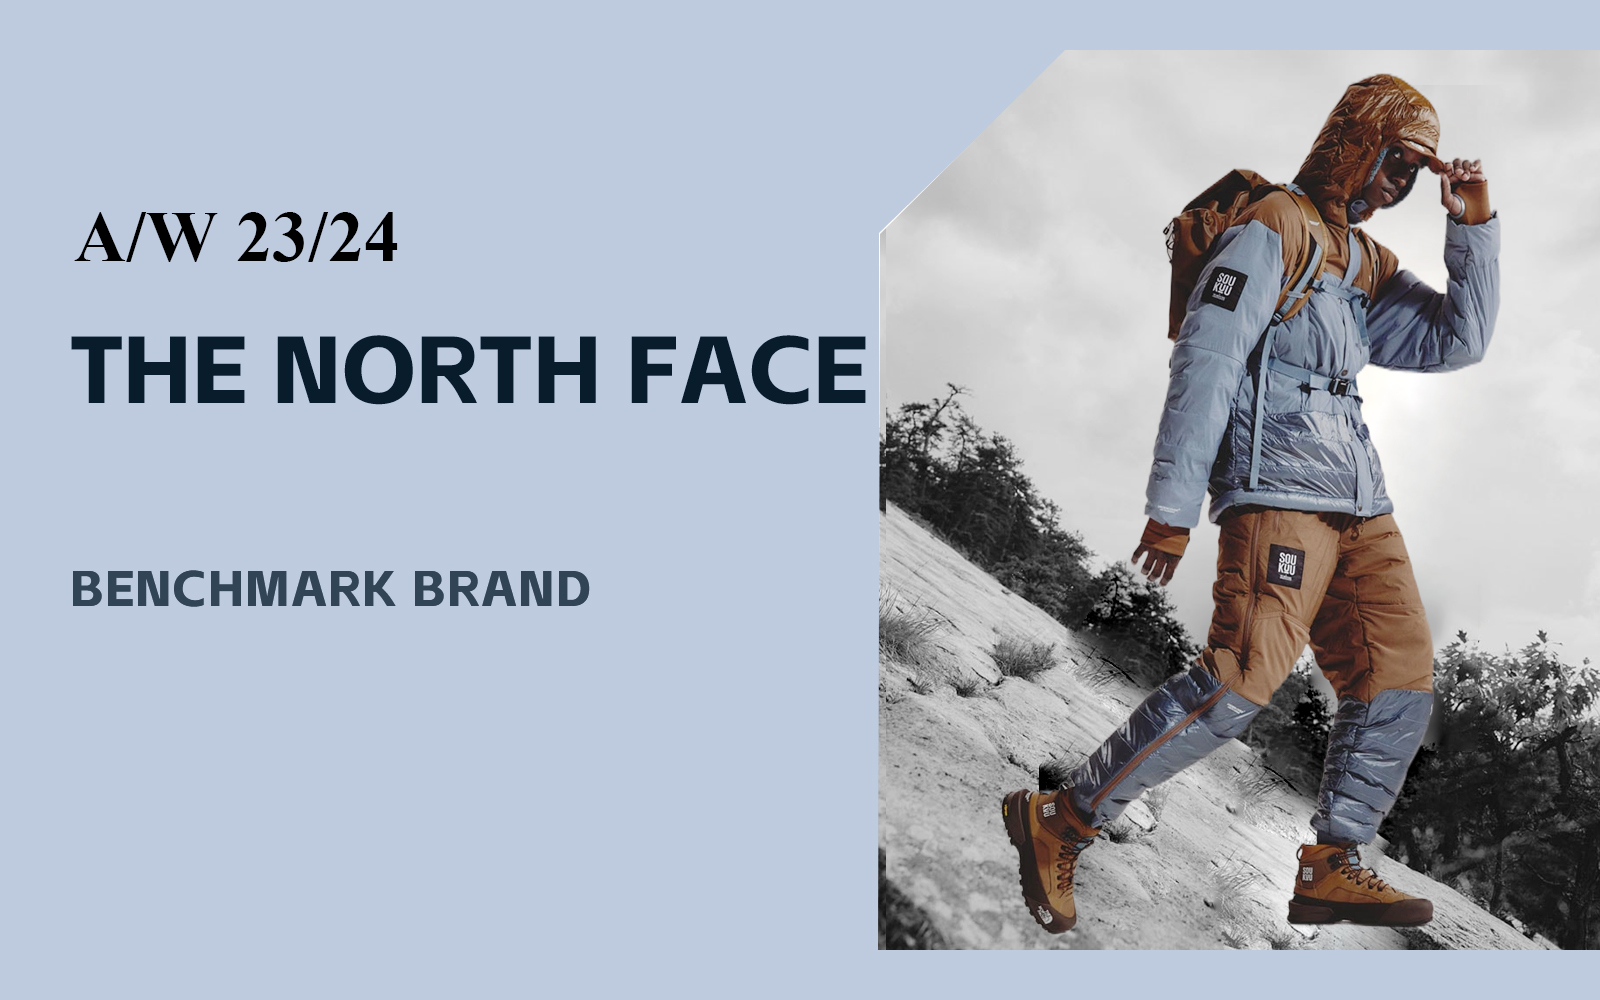 The Analysis of The North Face The Benchmark Outdoorwear Brand